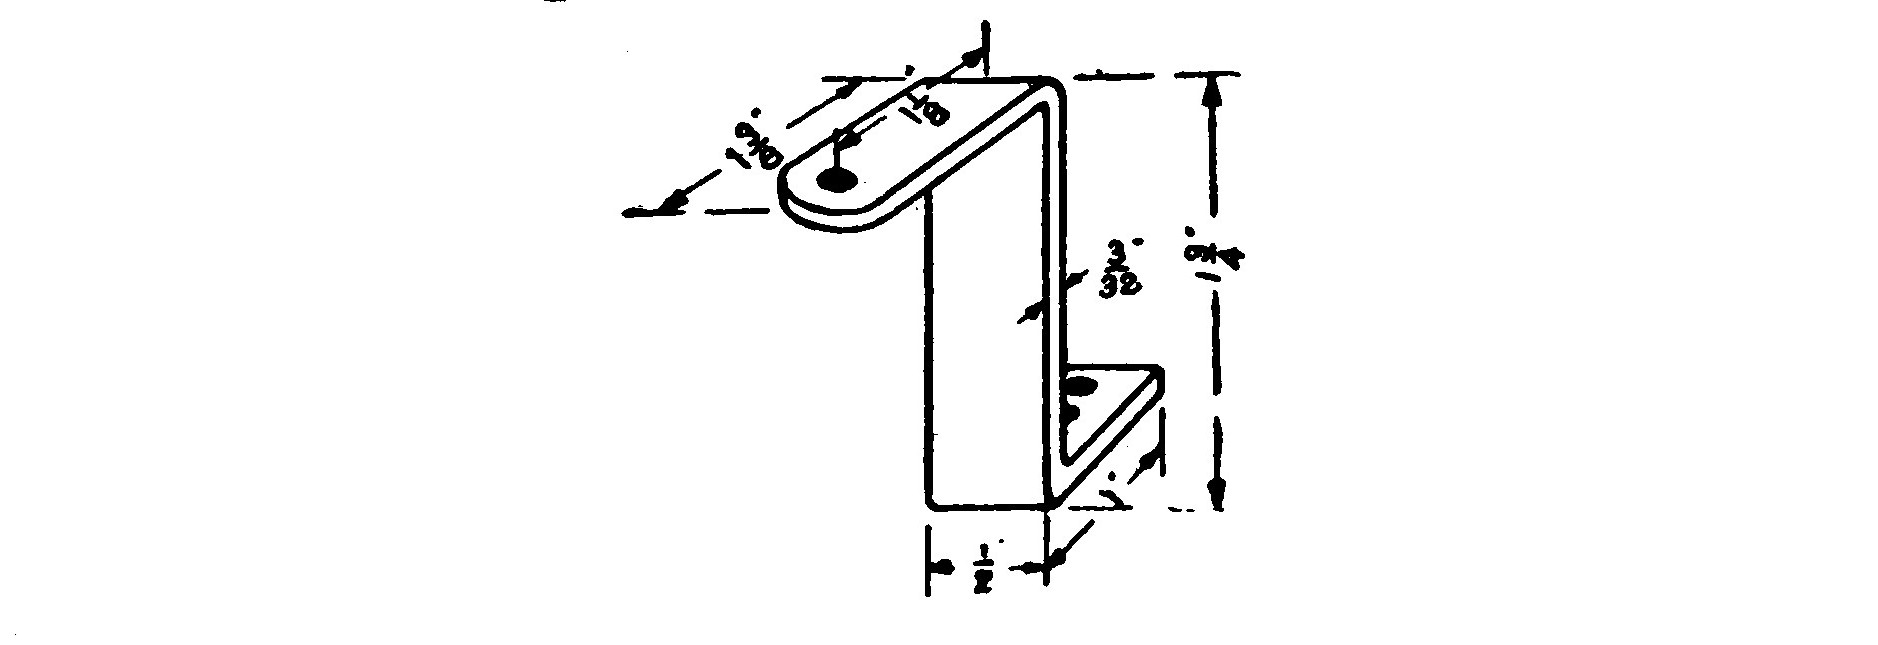 FIG. 36.—Details of the Standard which forms the upper bearings.